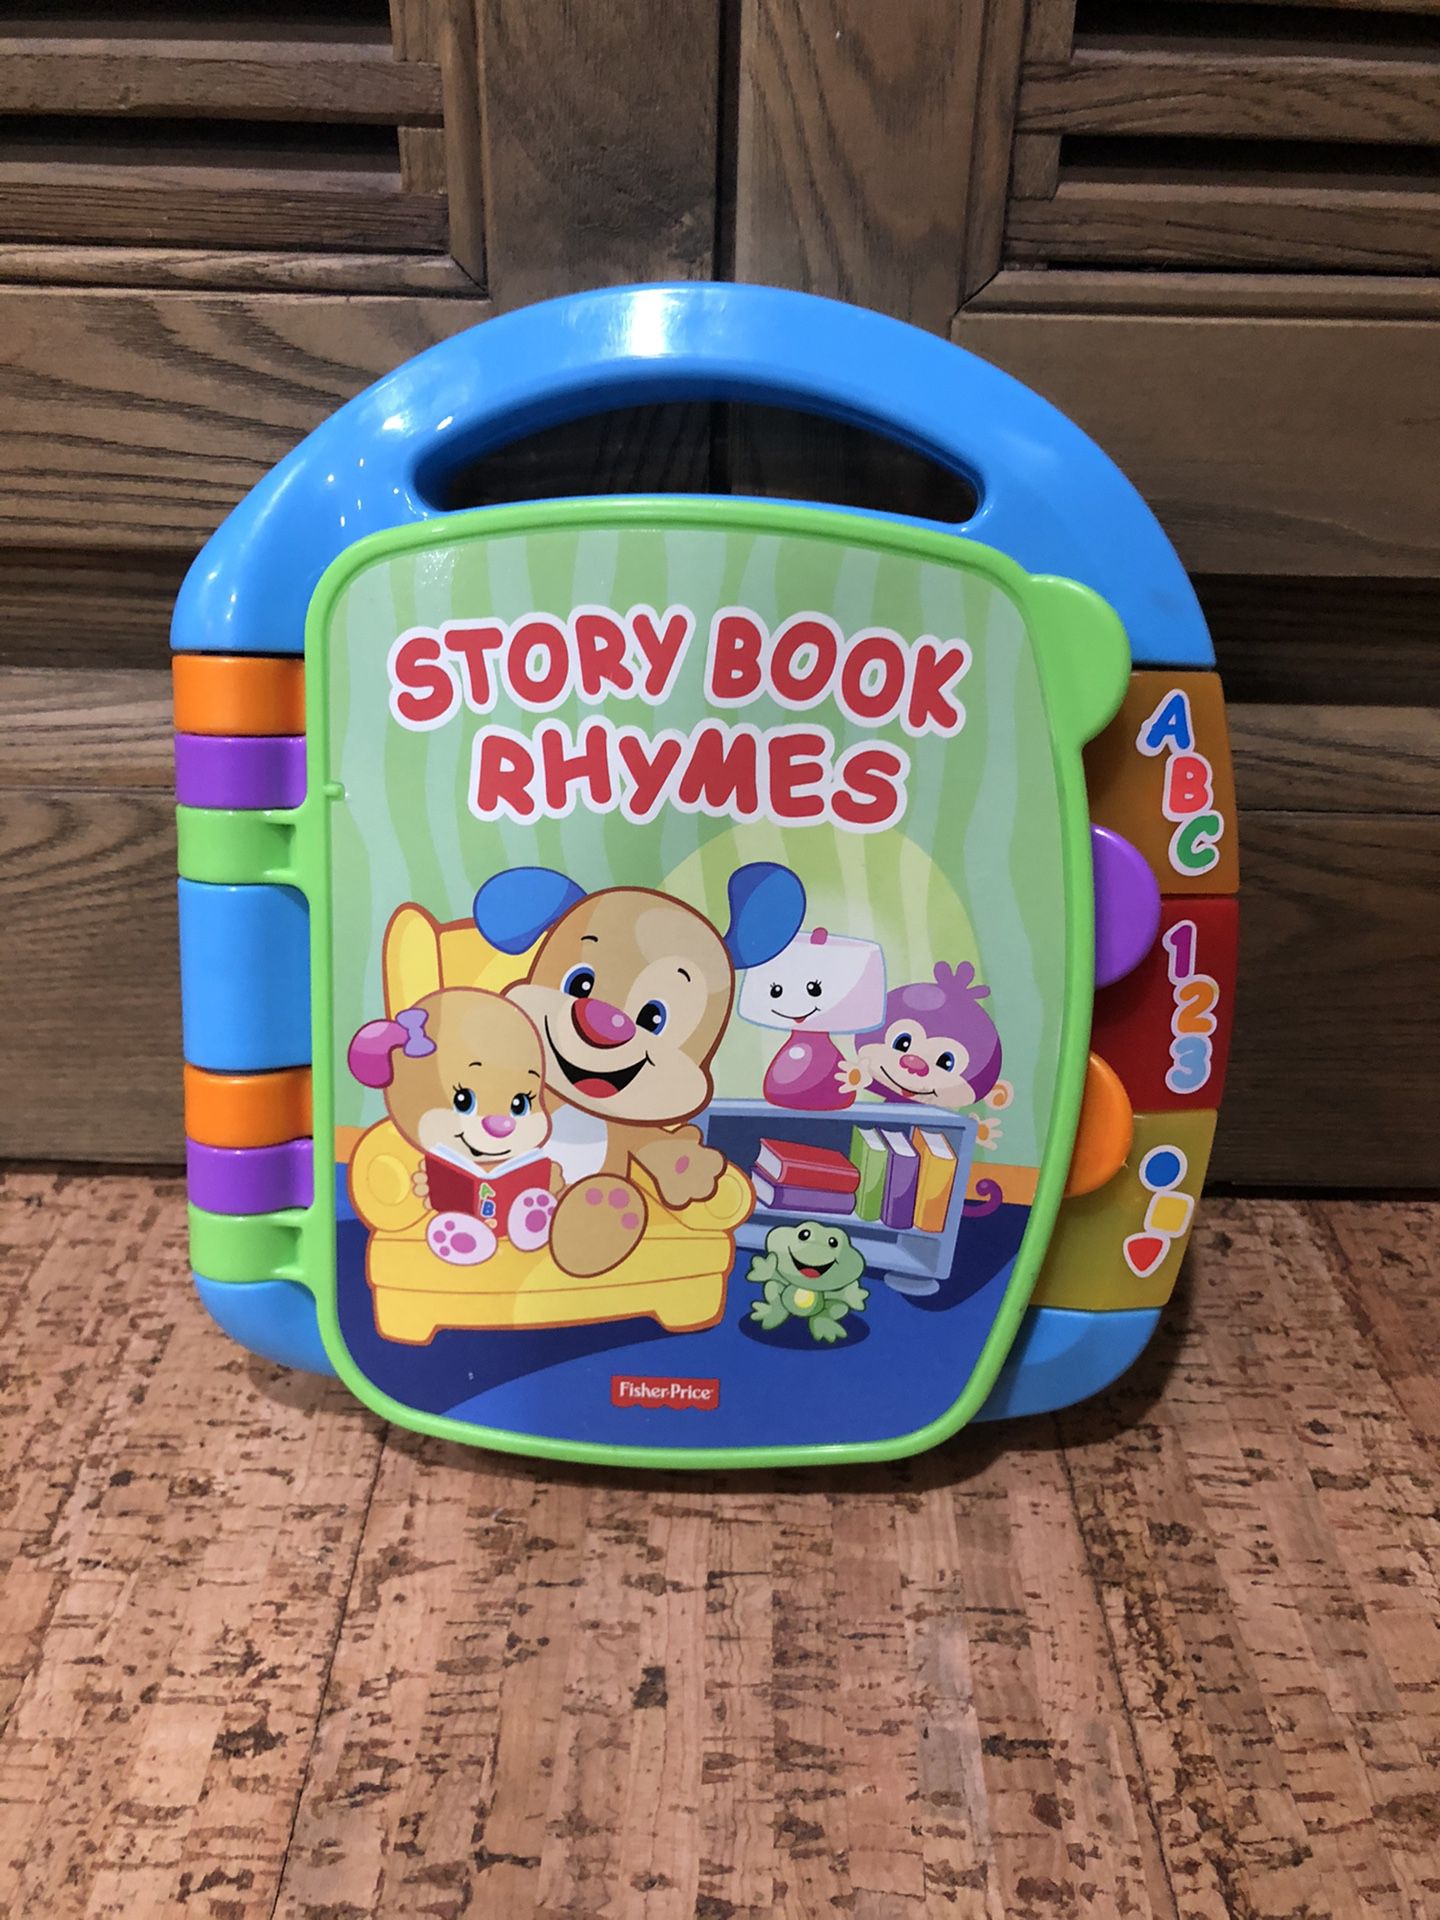 Fisher Price story book rhymes toy